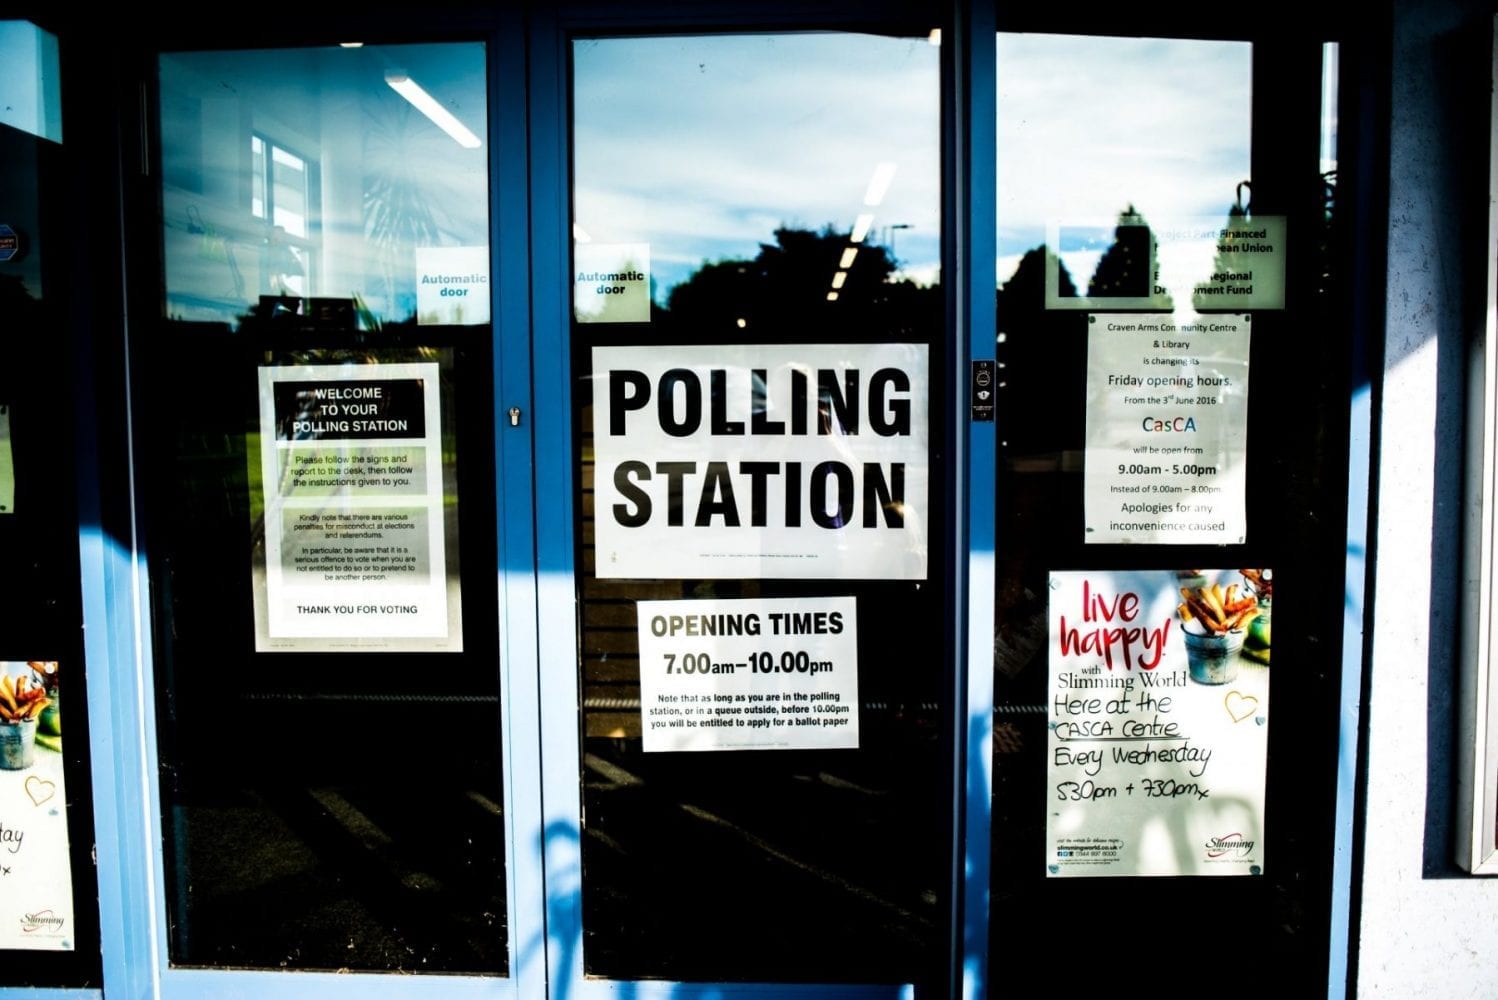 A photo of a polling station doorway